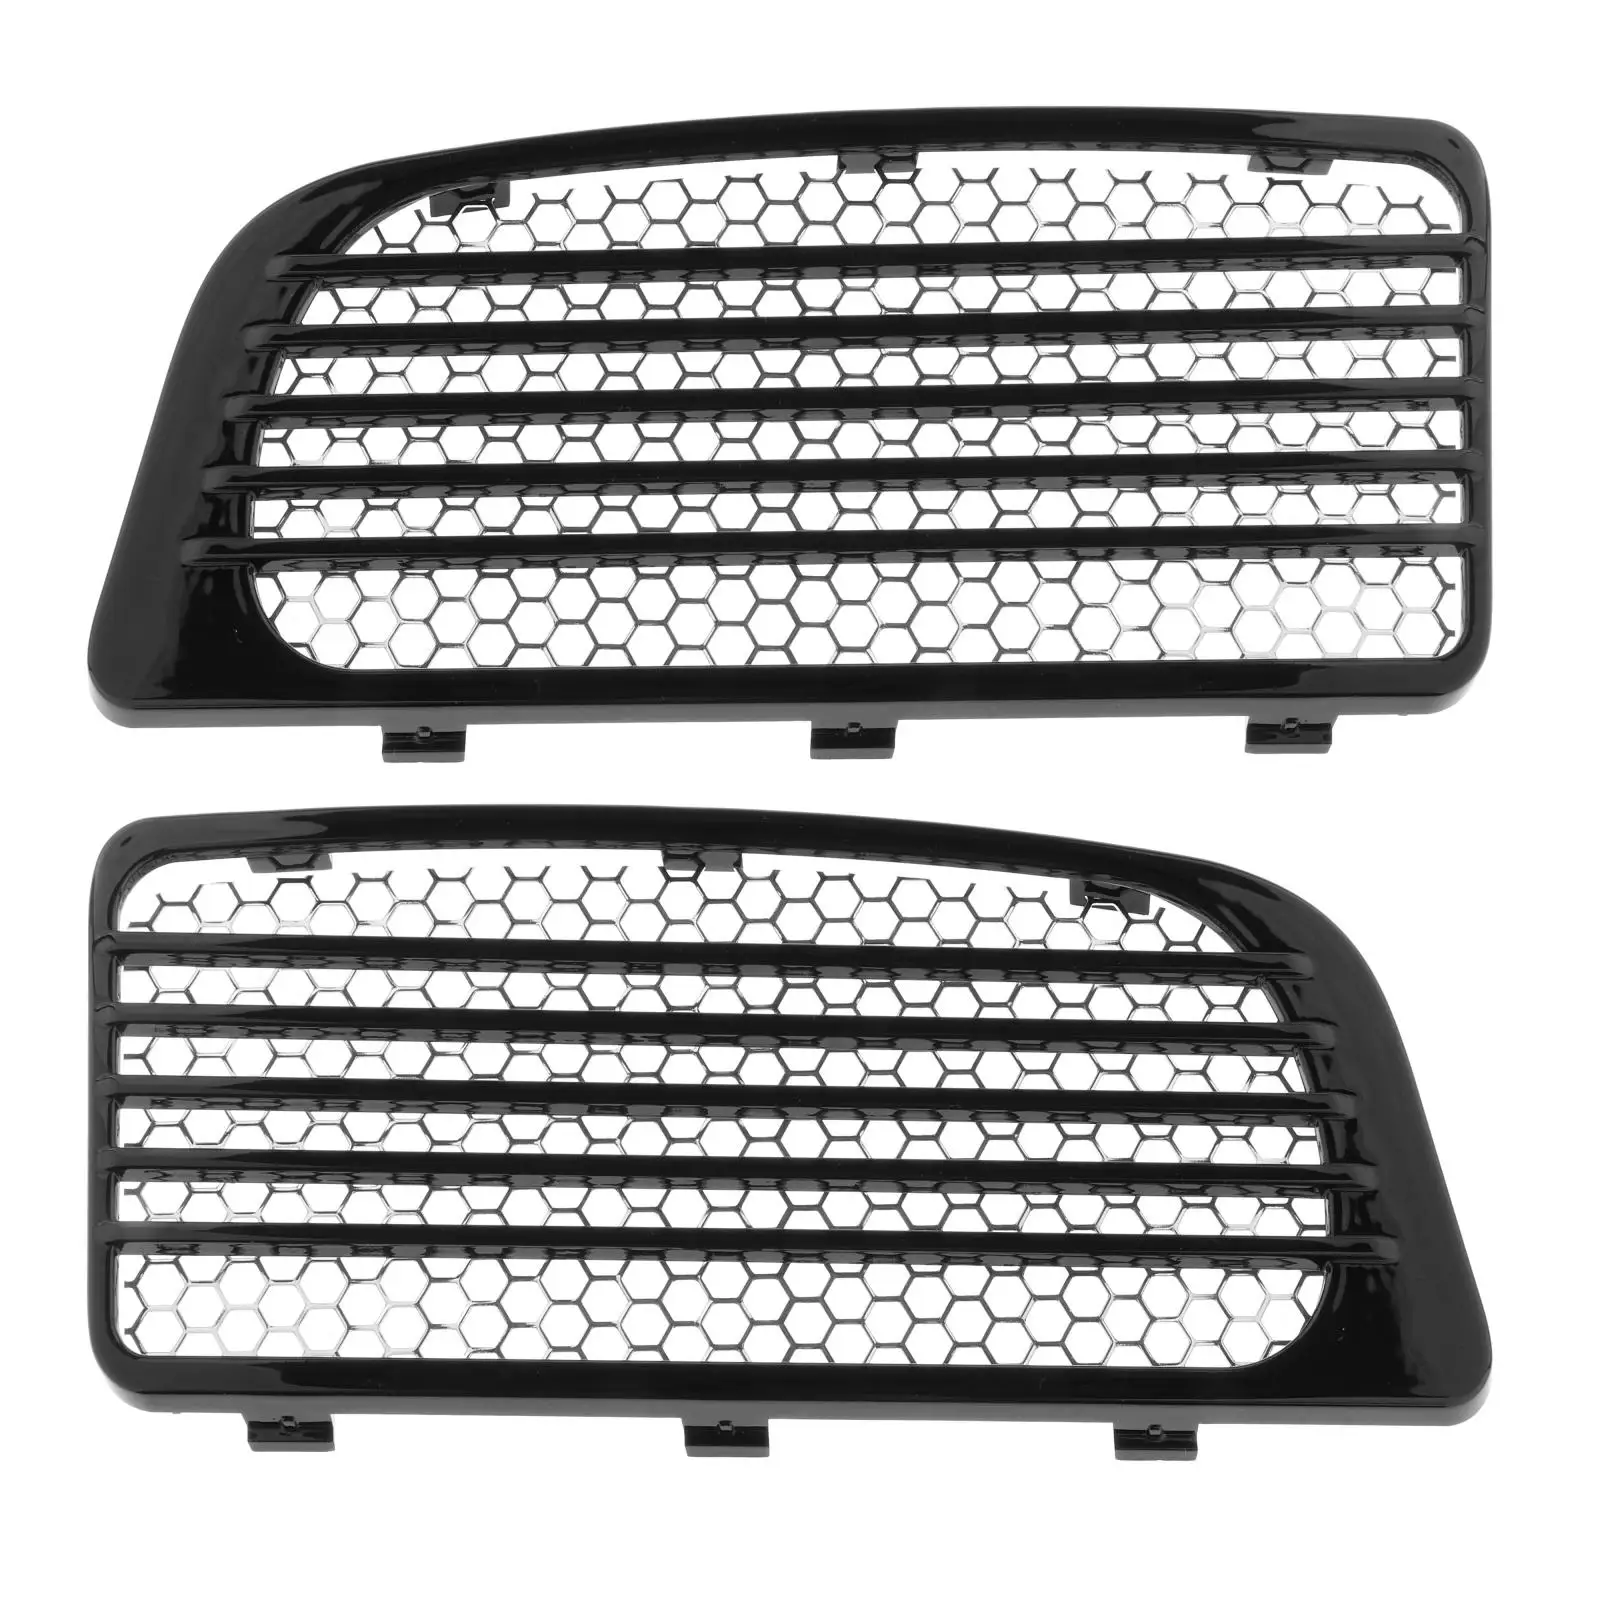 2pcs Motorcycle Radiator Grills w/ Metal Mesh Fit for Harley Touring Twin Cooled 14+ Accessories